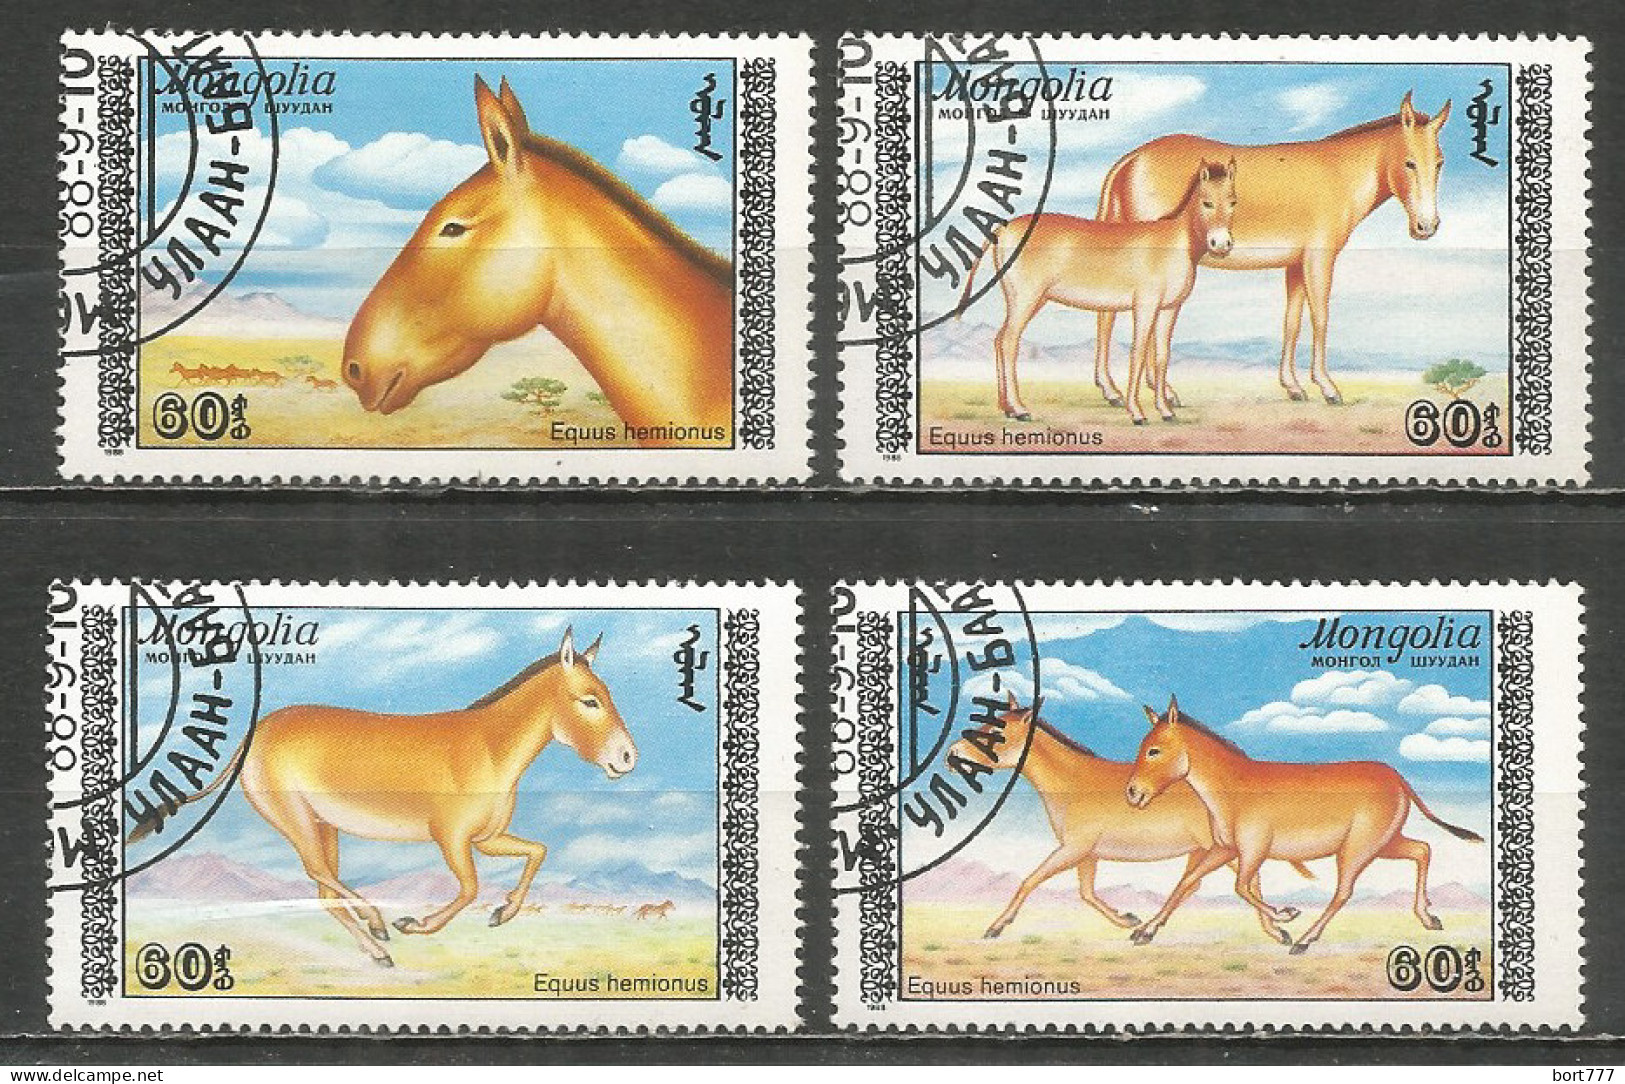 Mongolia 1988 Used Stamps CTO Animals - Mongolie